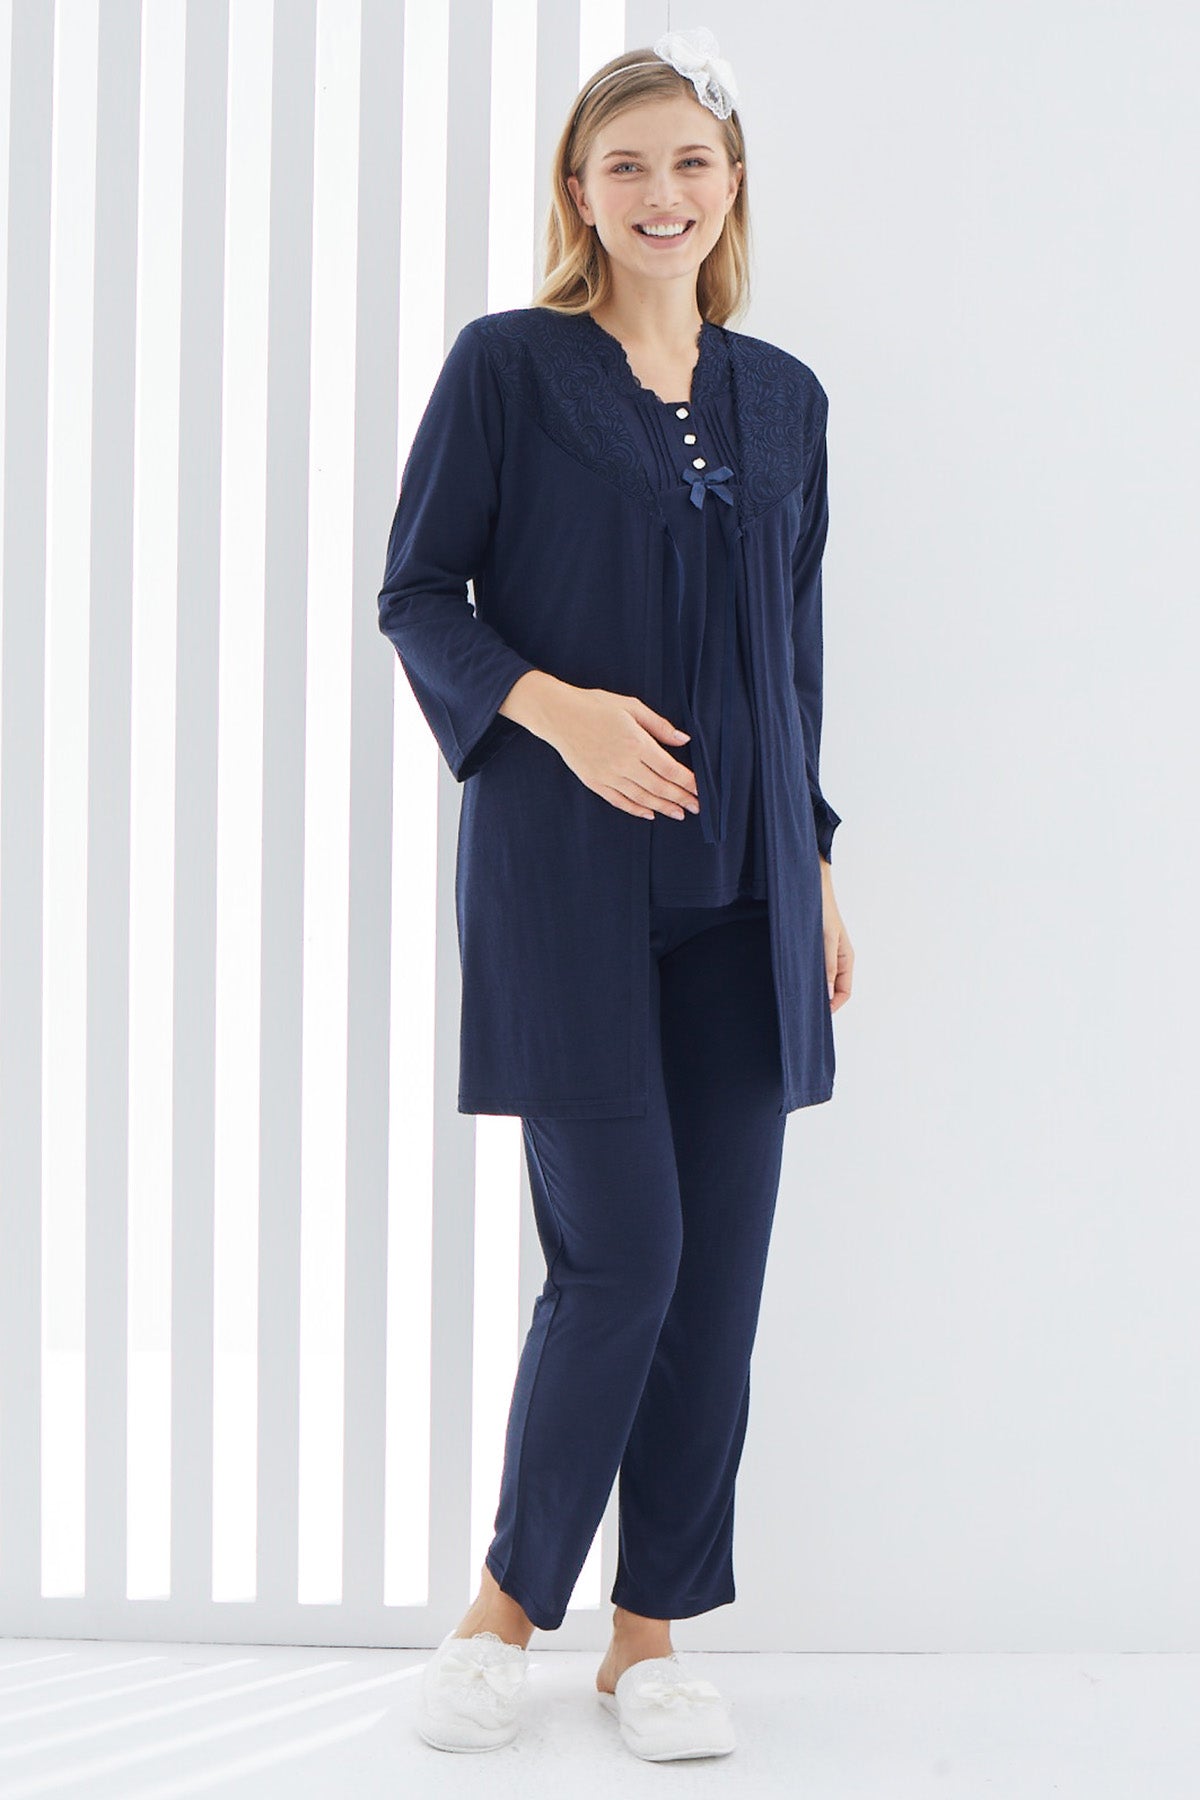 Shopymommy 3402 Lace 3-Pieces Maternity & Nursing Pajamas With Guipure Robe Navy Blue